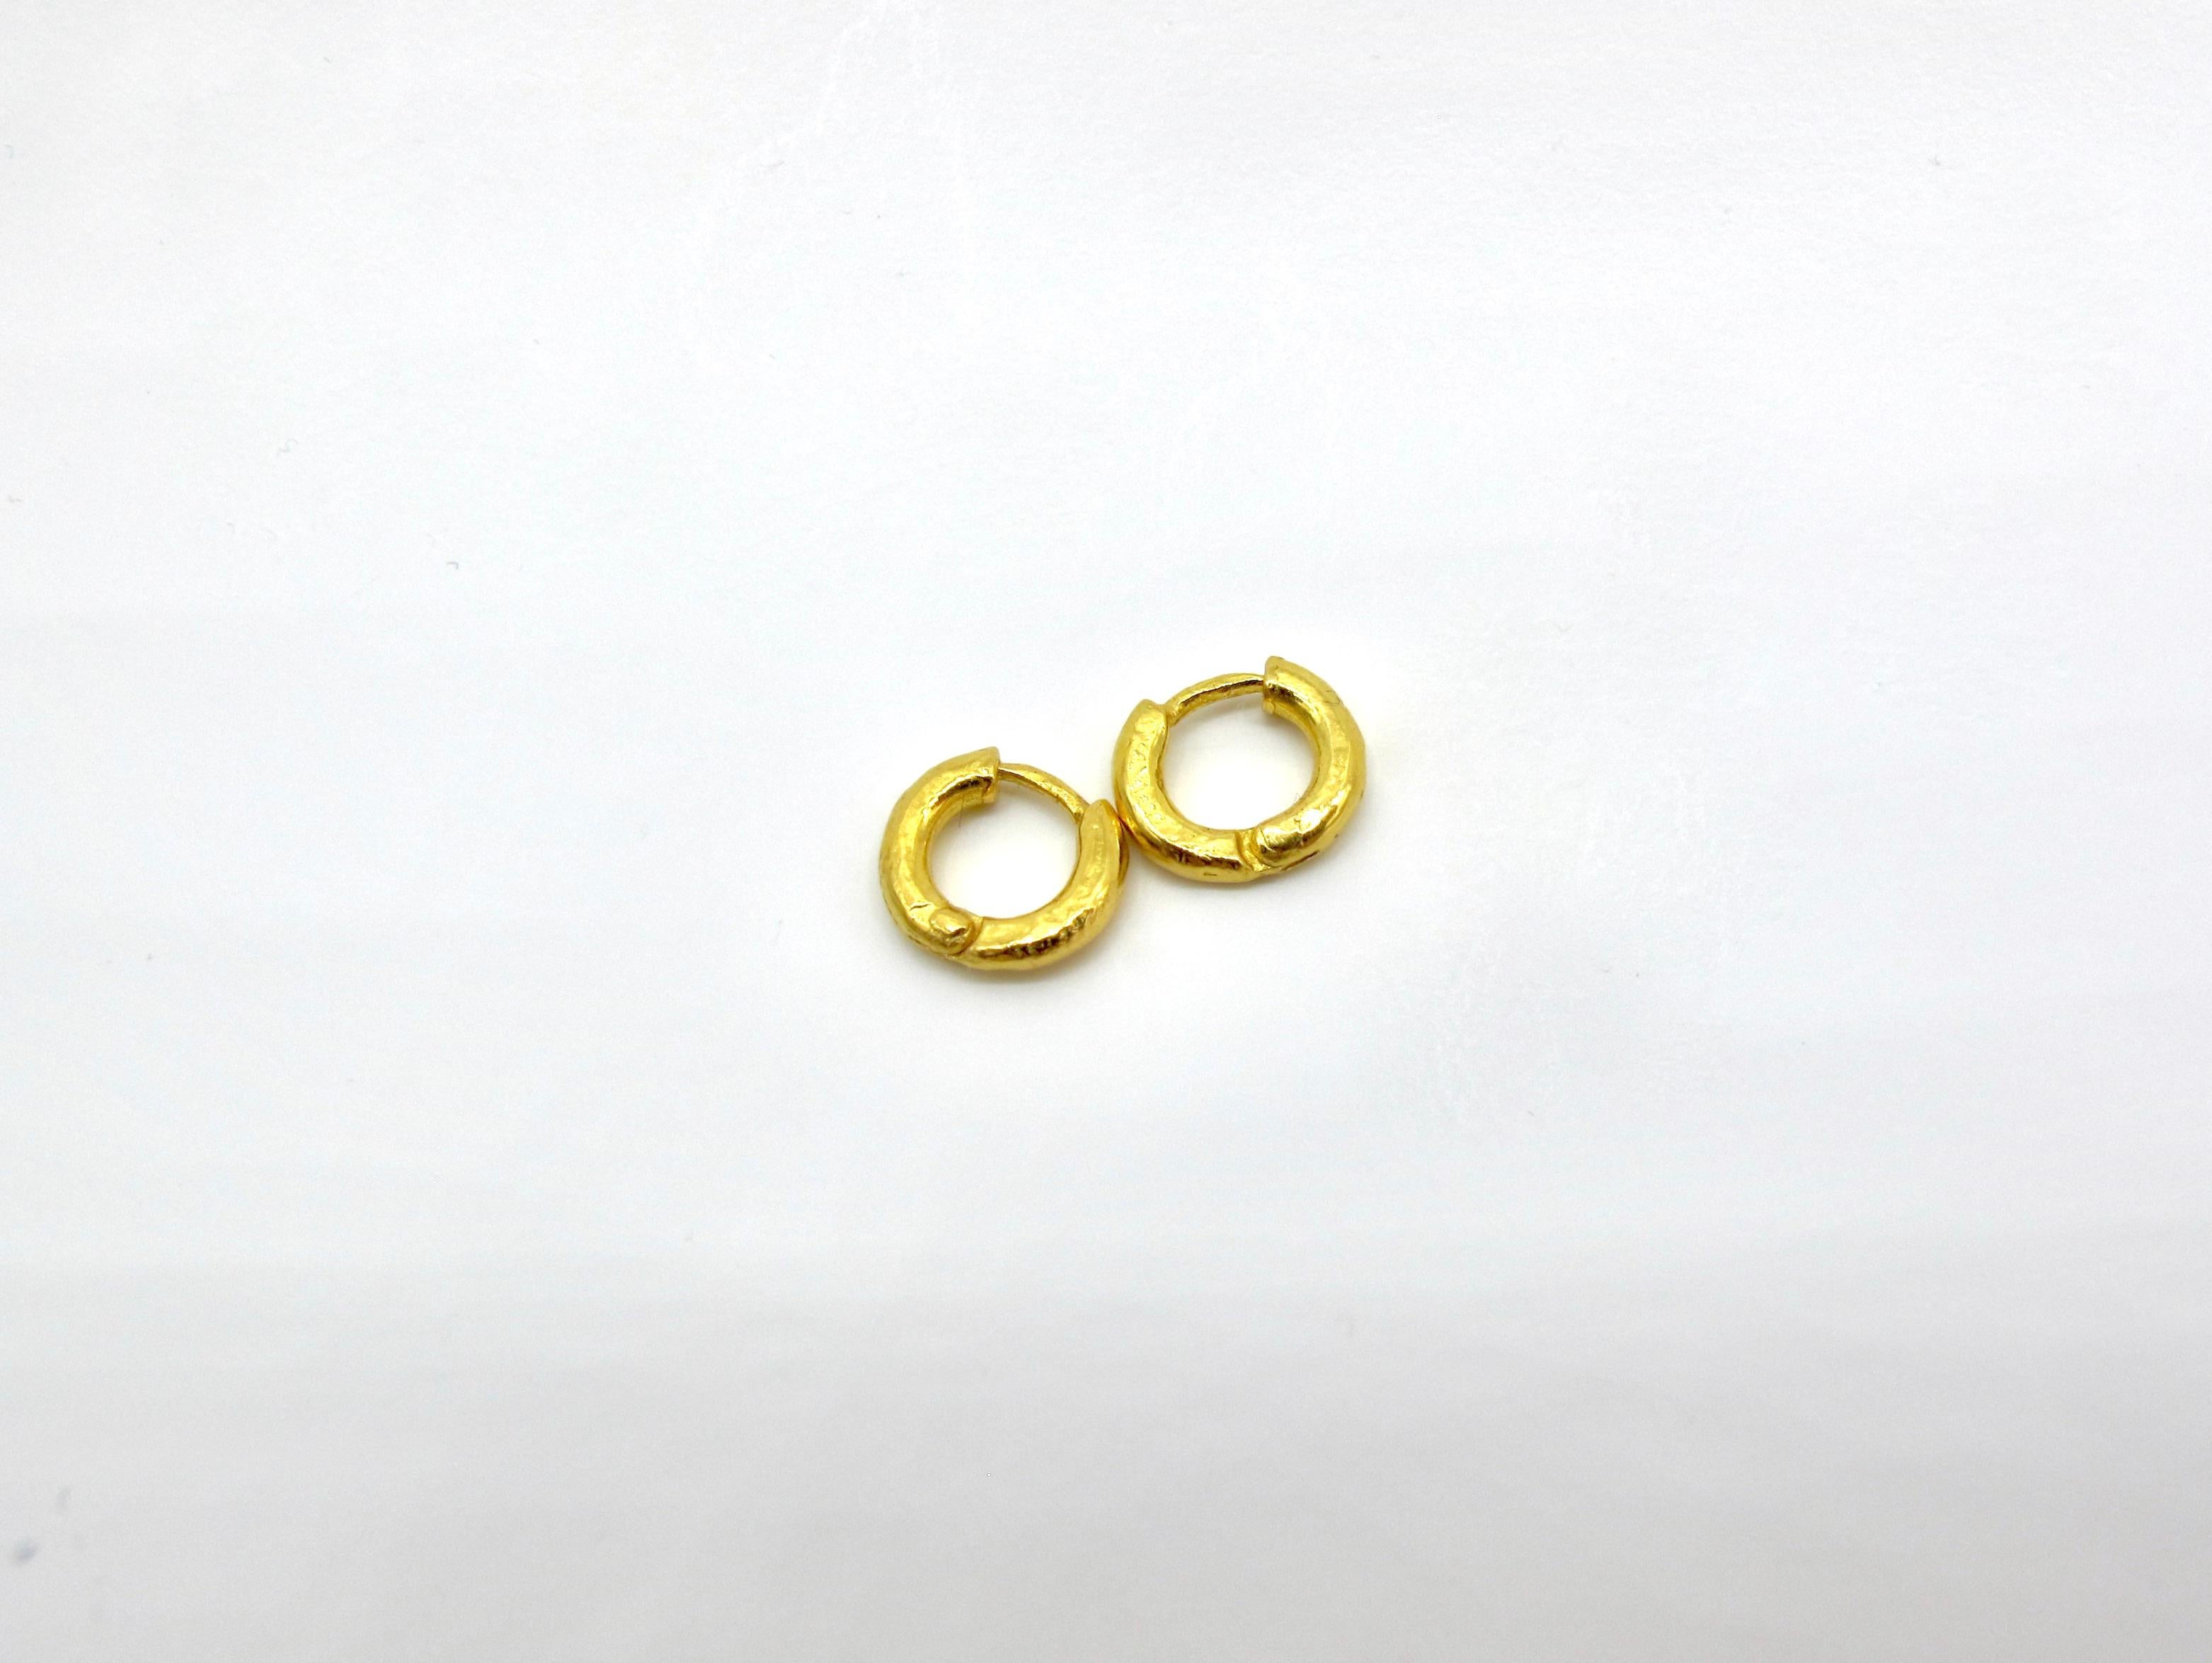 The perfect tiny hoops for gold and jewelry lovers who just want something sporty and everyday without foregoing a luxurious look and feel which 22k gold will always deliver on. Hand fabricated in 22k gold with visible construction joints, tool